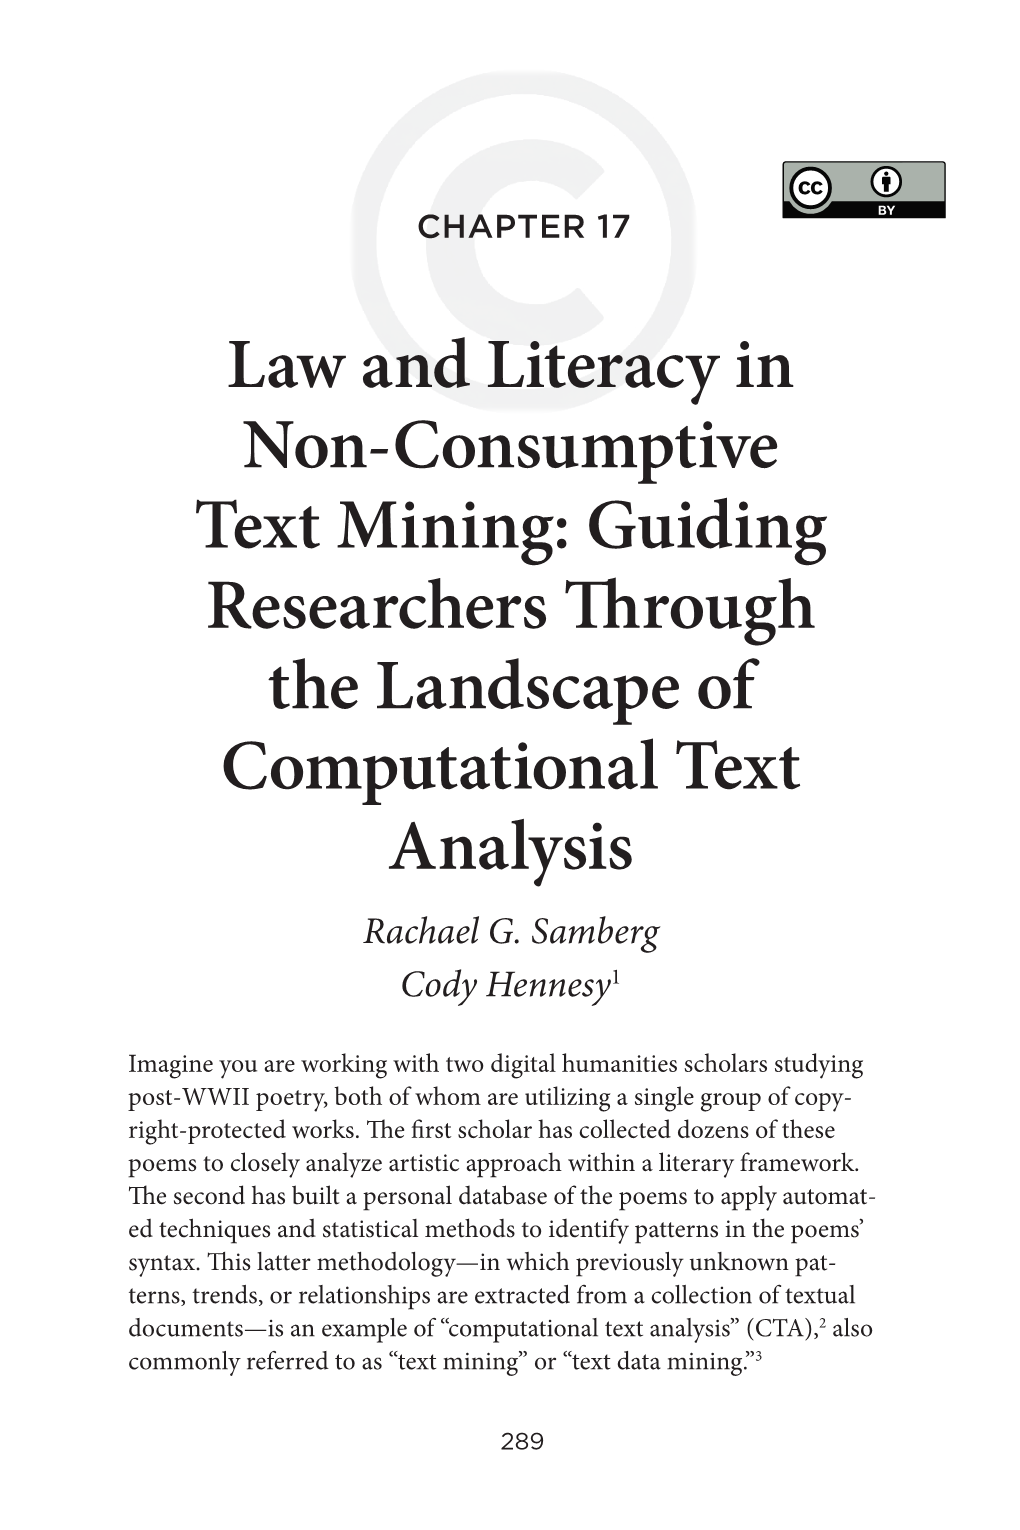 Law and Literacy in Non-Consumptive Text Mining: Guiding Researchers Through the Landscape of Computational Text Analysis Rachael G